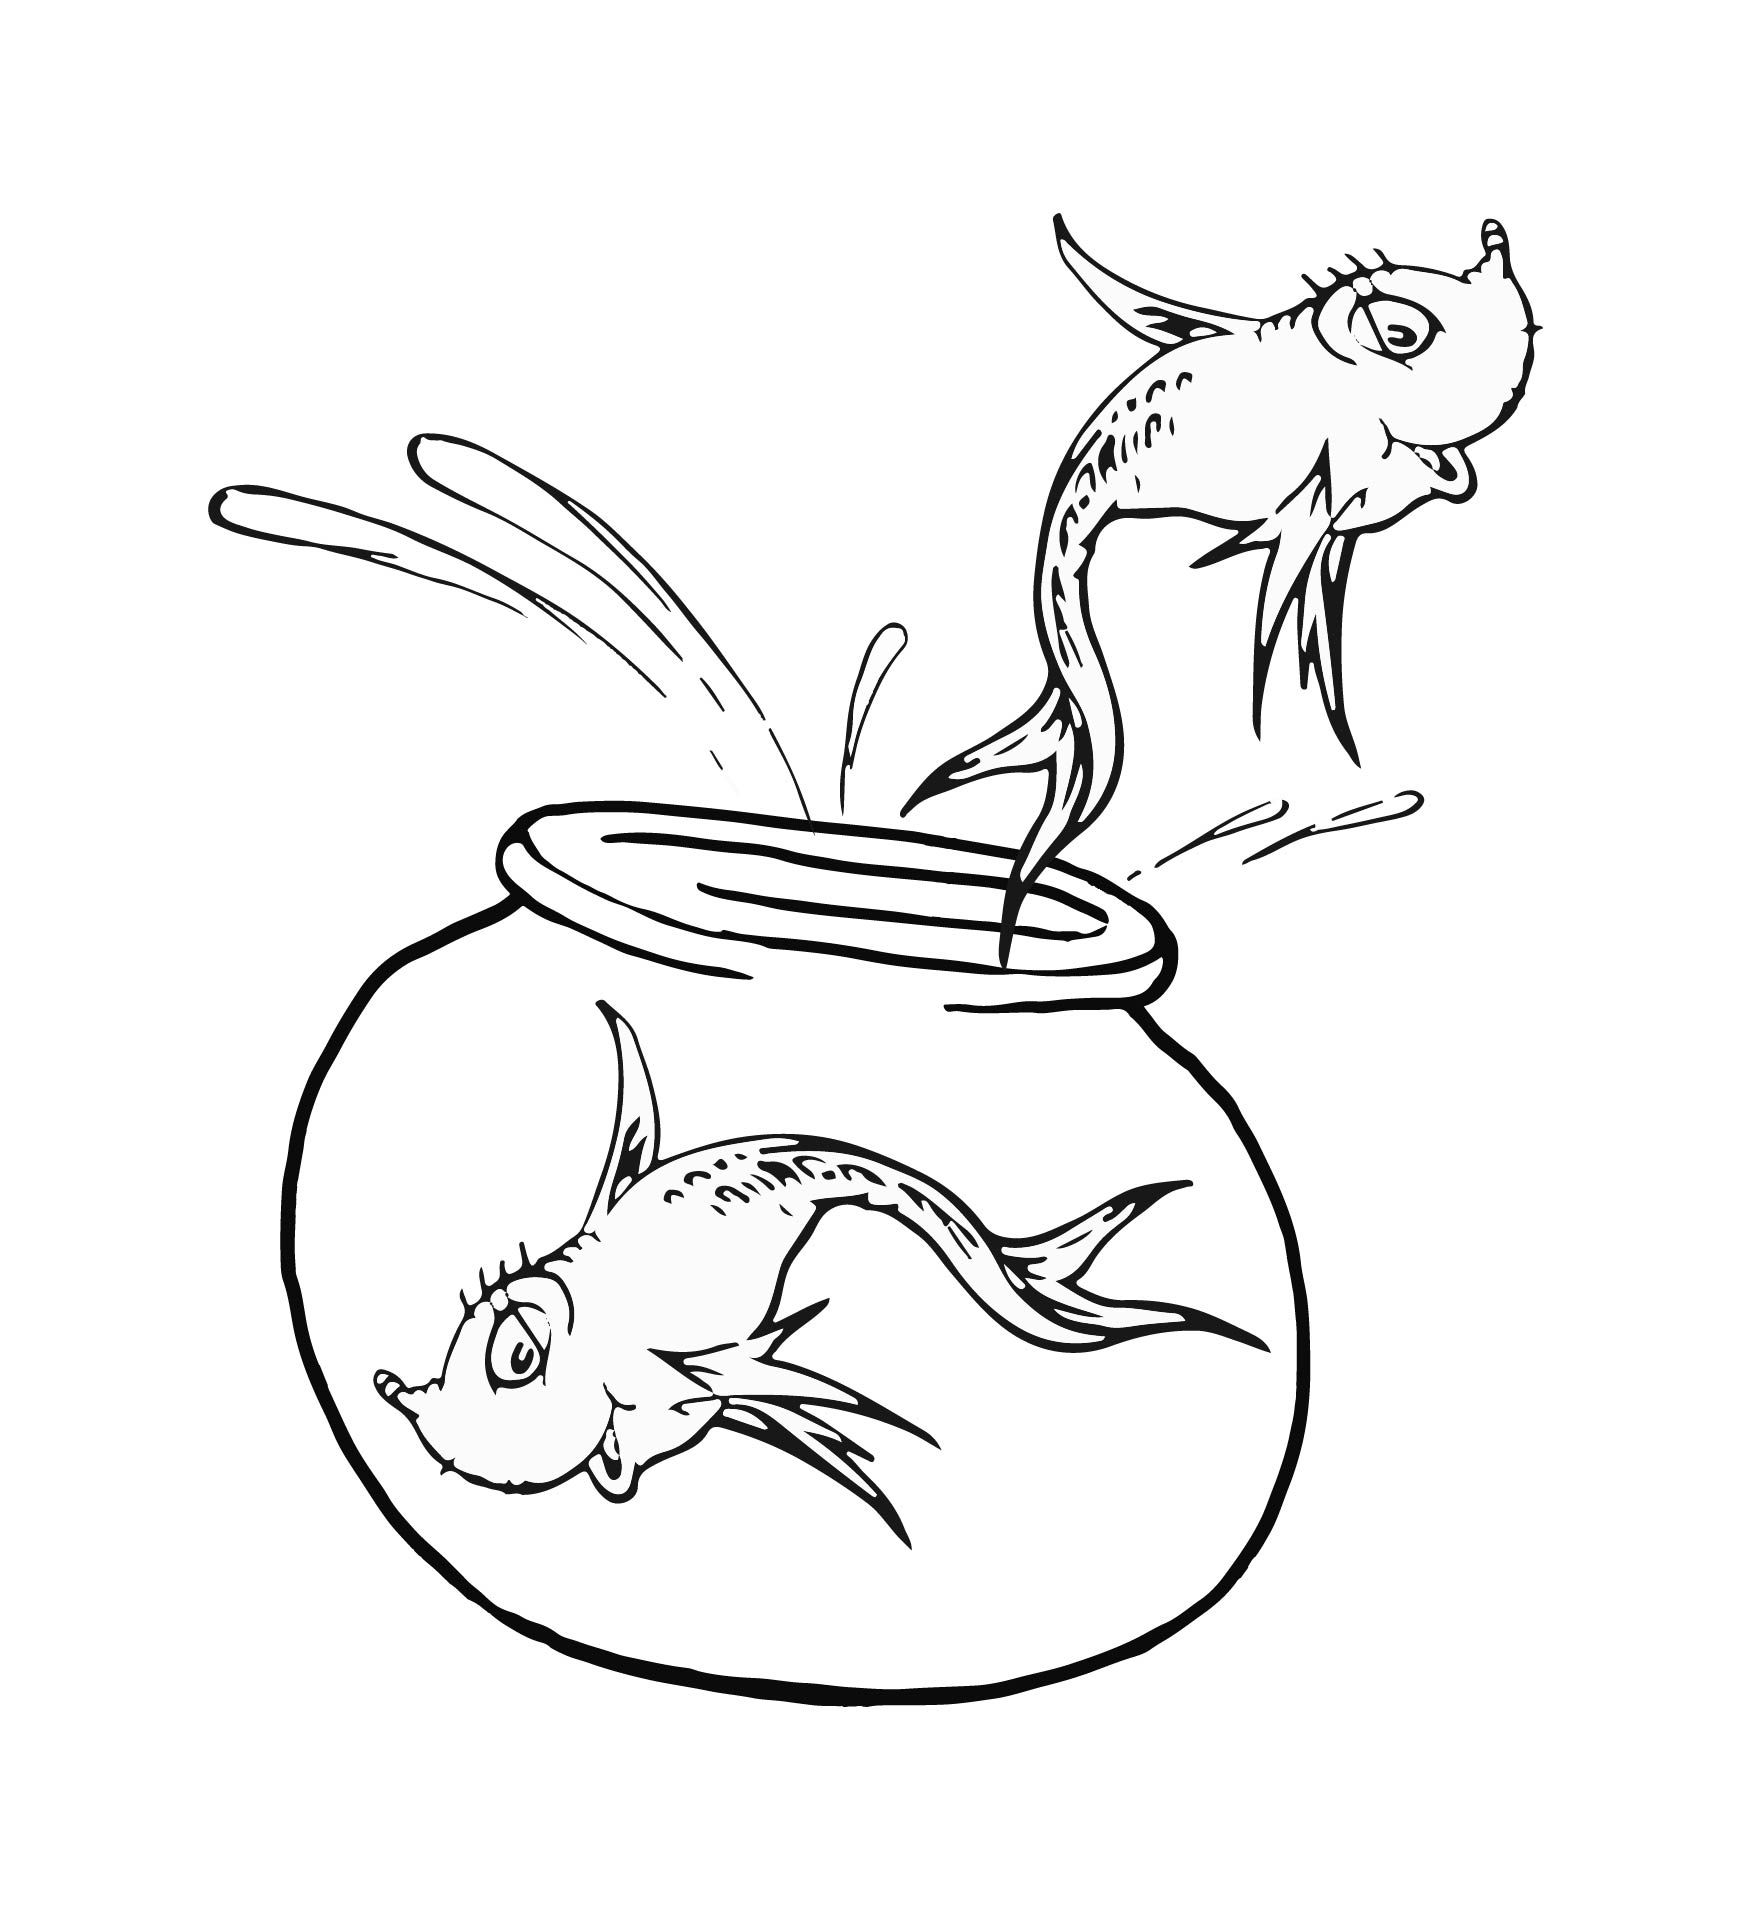 9 Best One Fish Two Fish Coloring Pages Printable PDF for Free at Printablee